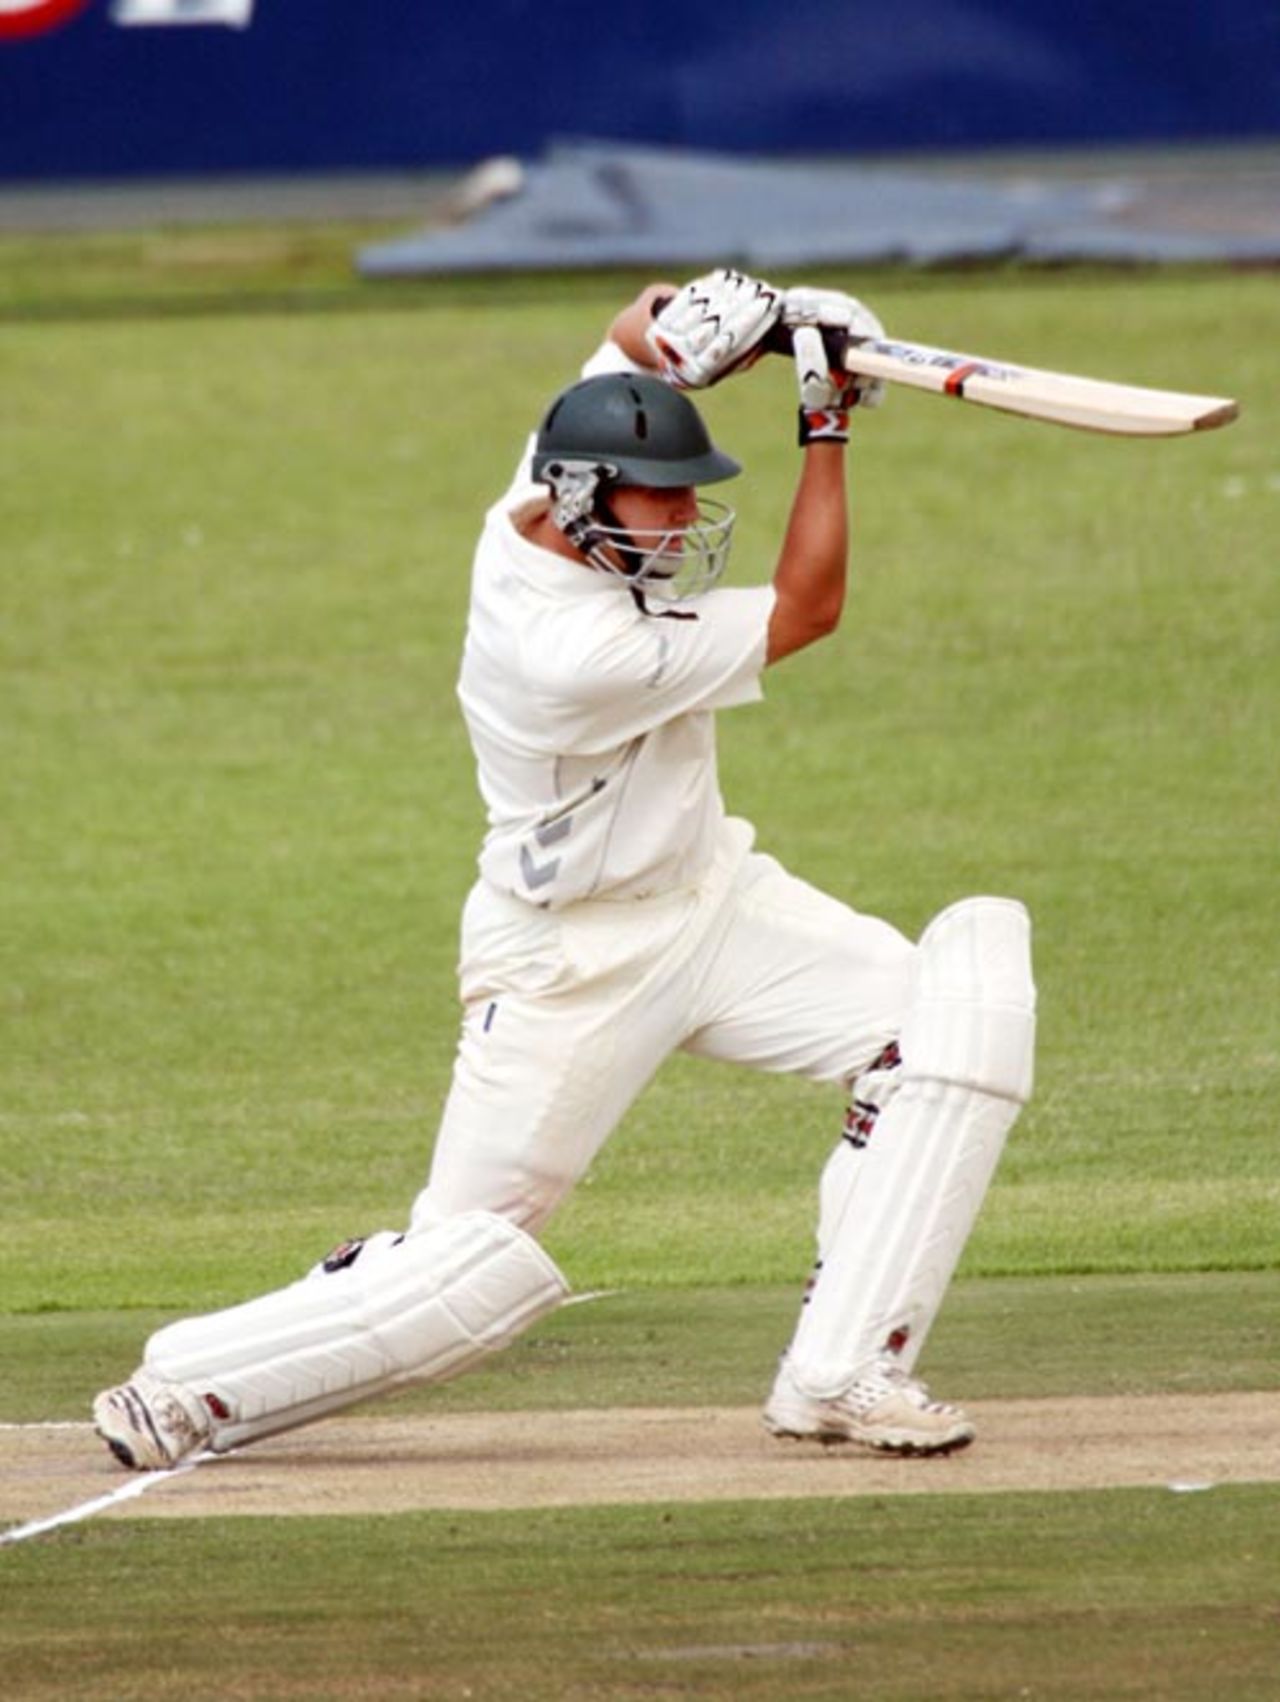 Shaun Liebisch drives during his debut, Northerns v Free State, SAA Provincial Three-Day Challenge, Pretoria, 2nd day, November 2, 2007